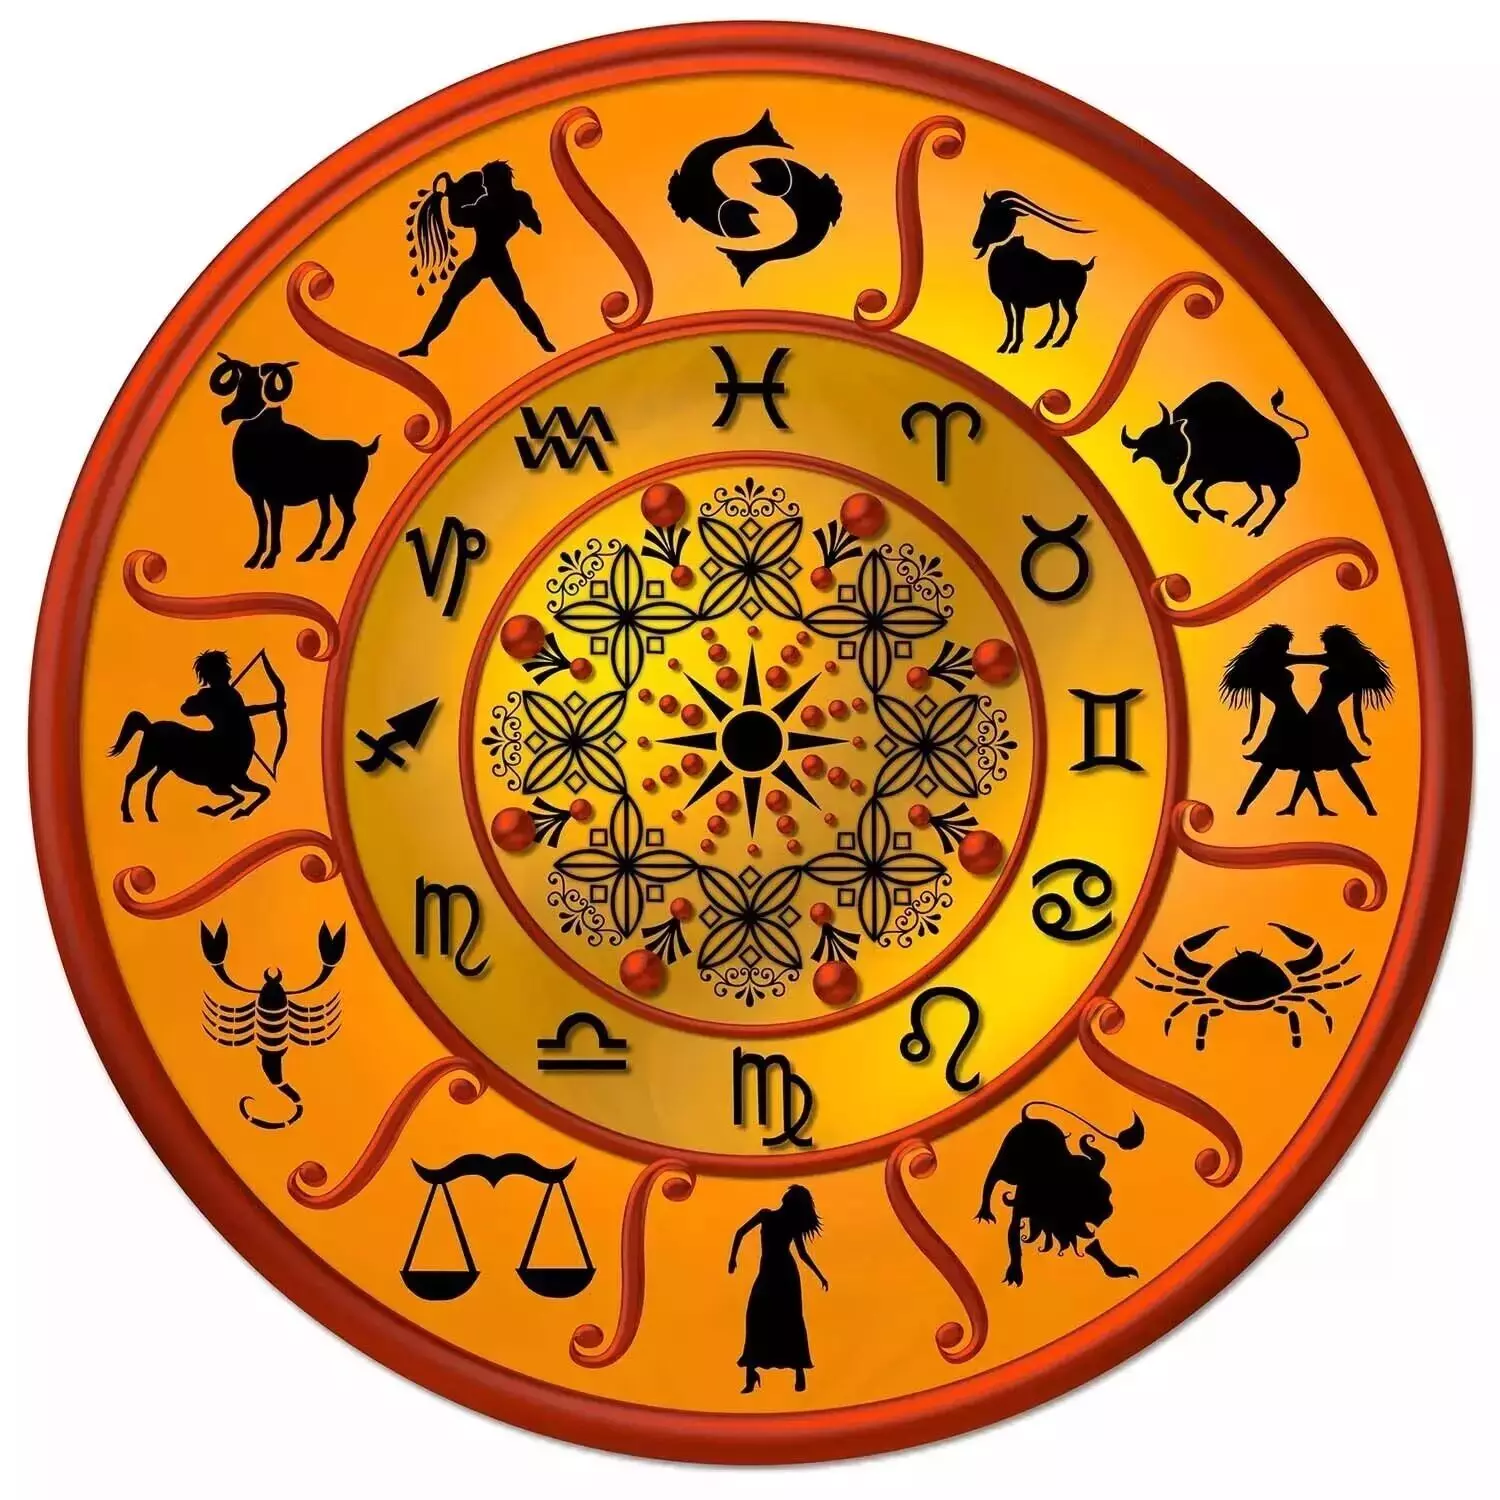 13 September – Know your todays horoscope